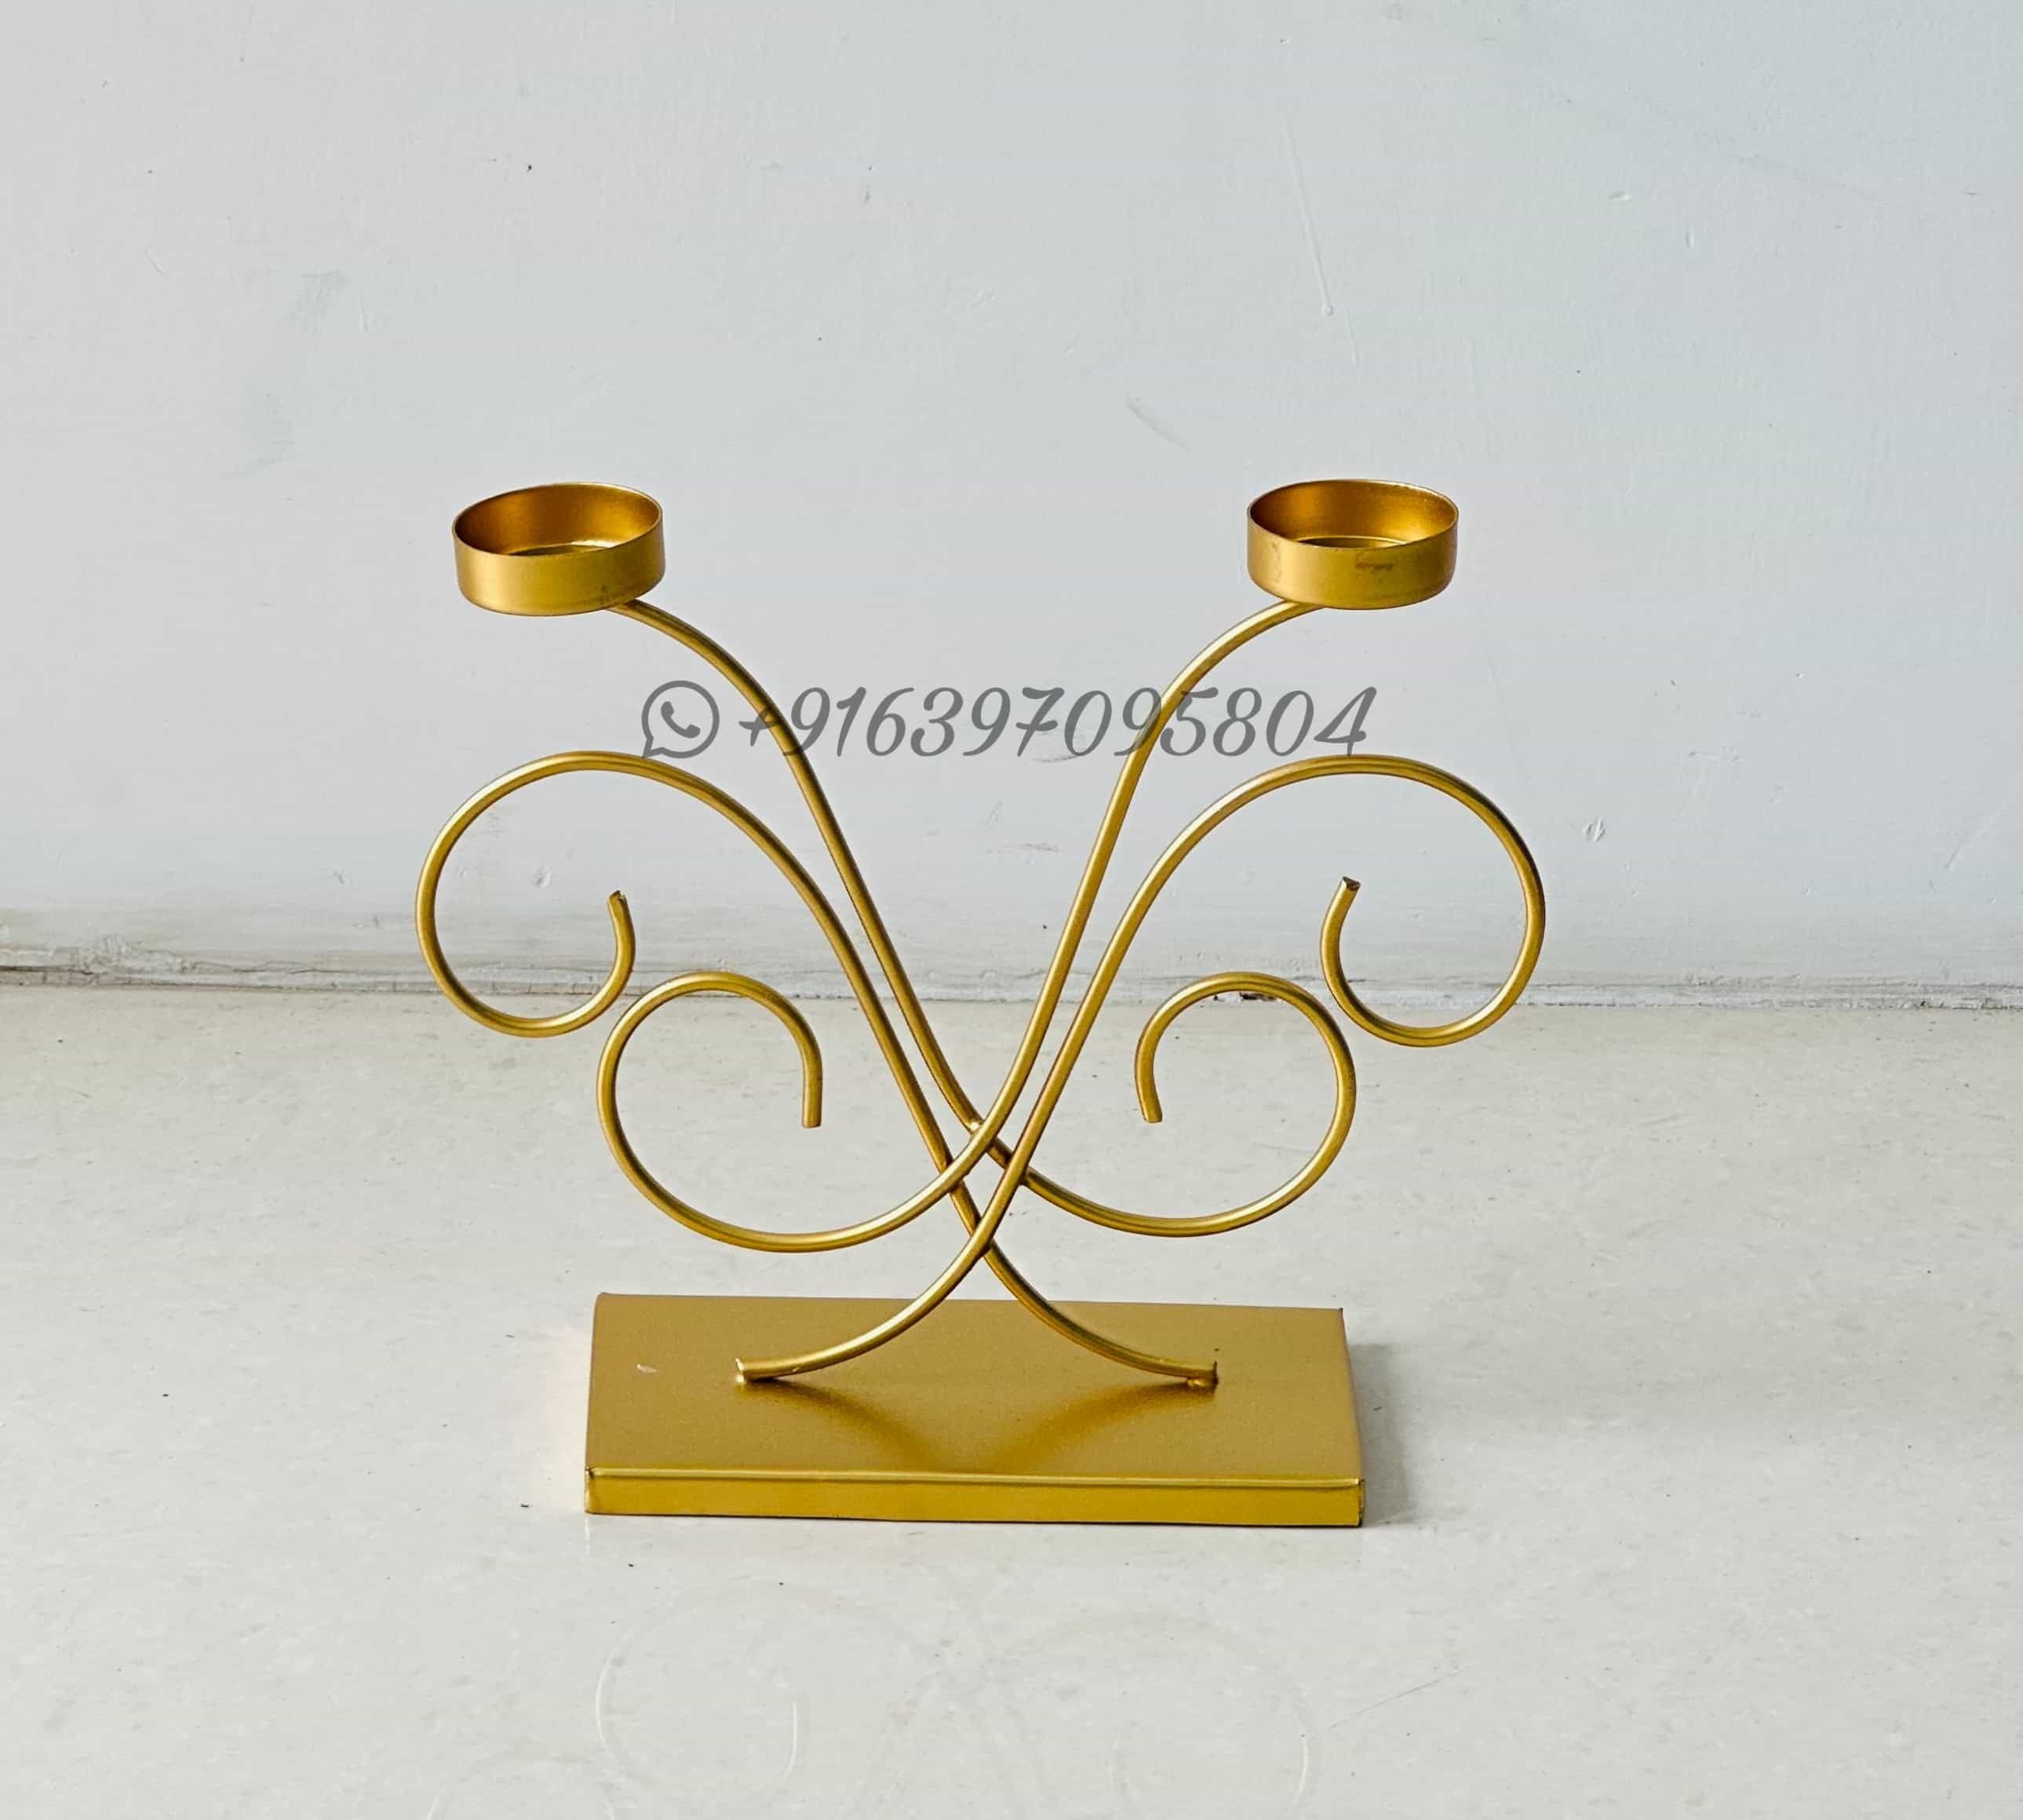 GCO Tea Light Stand aka Candle stand in iron with golden powder coated finish